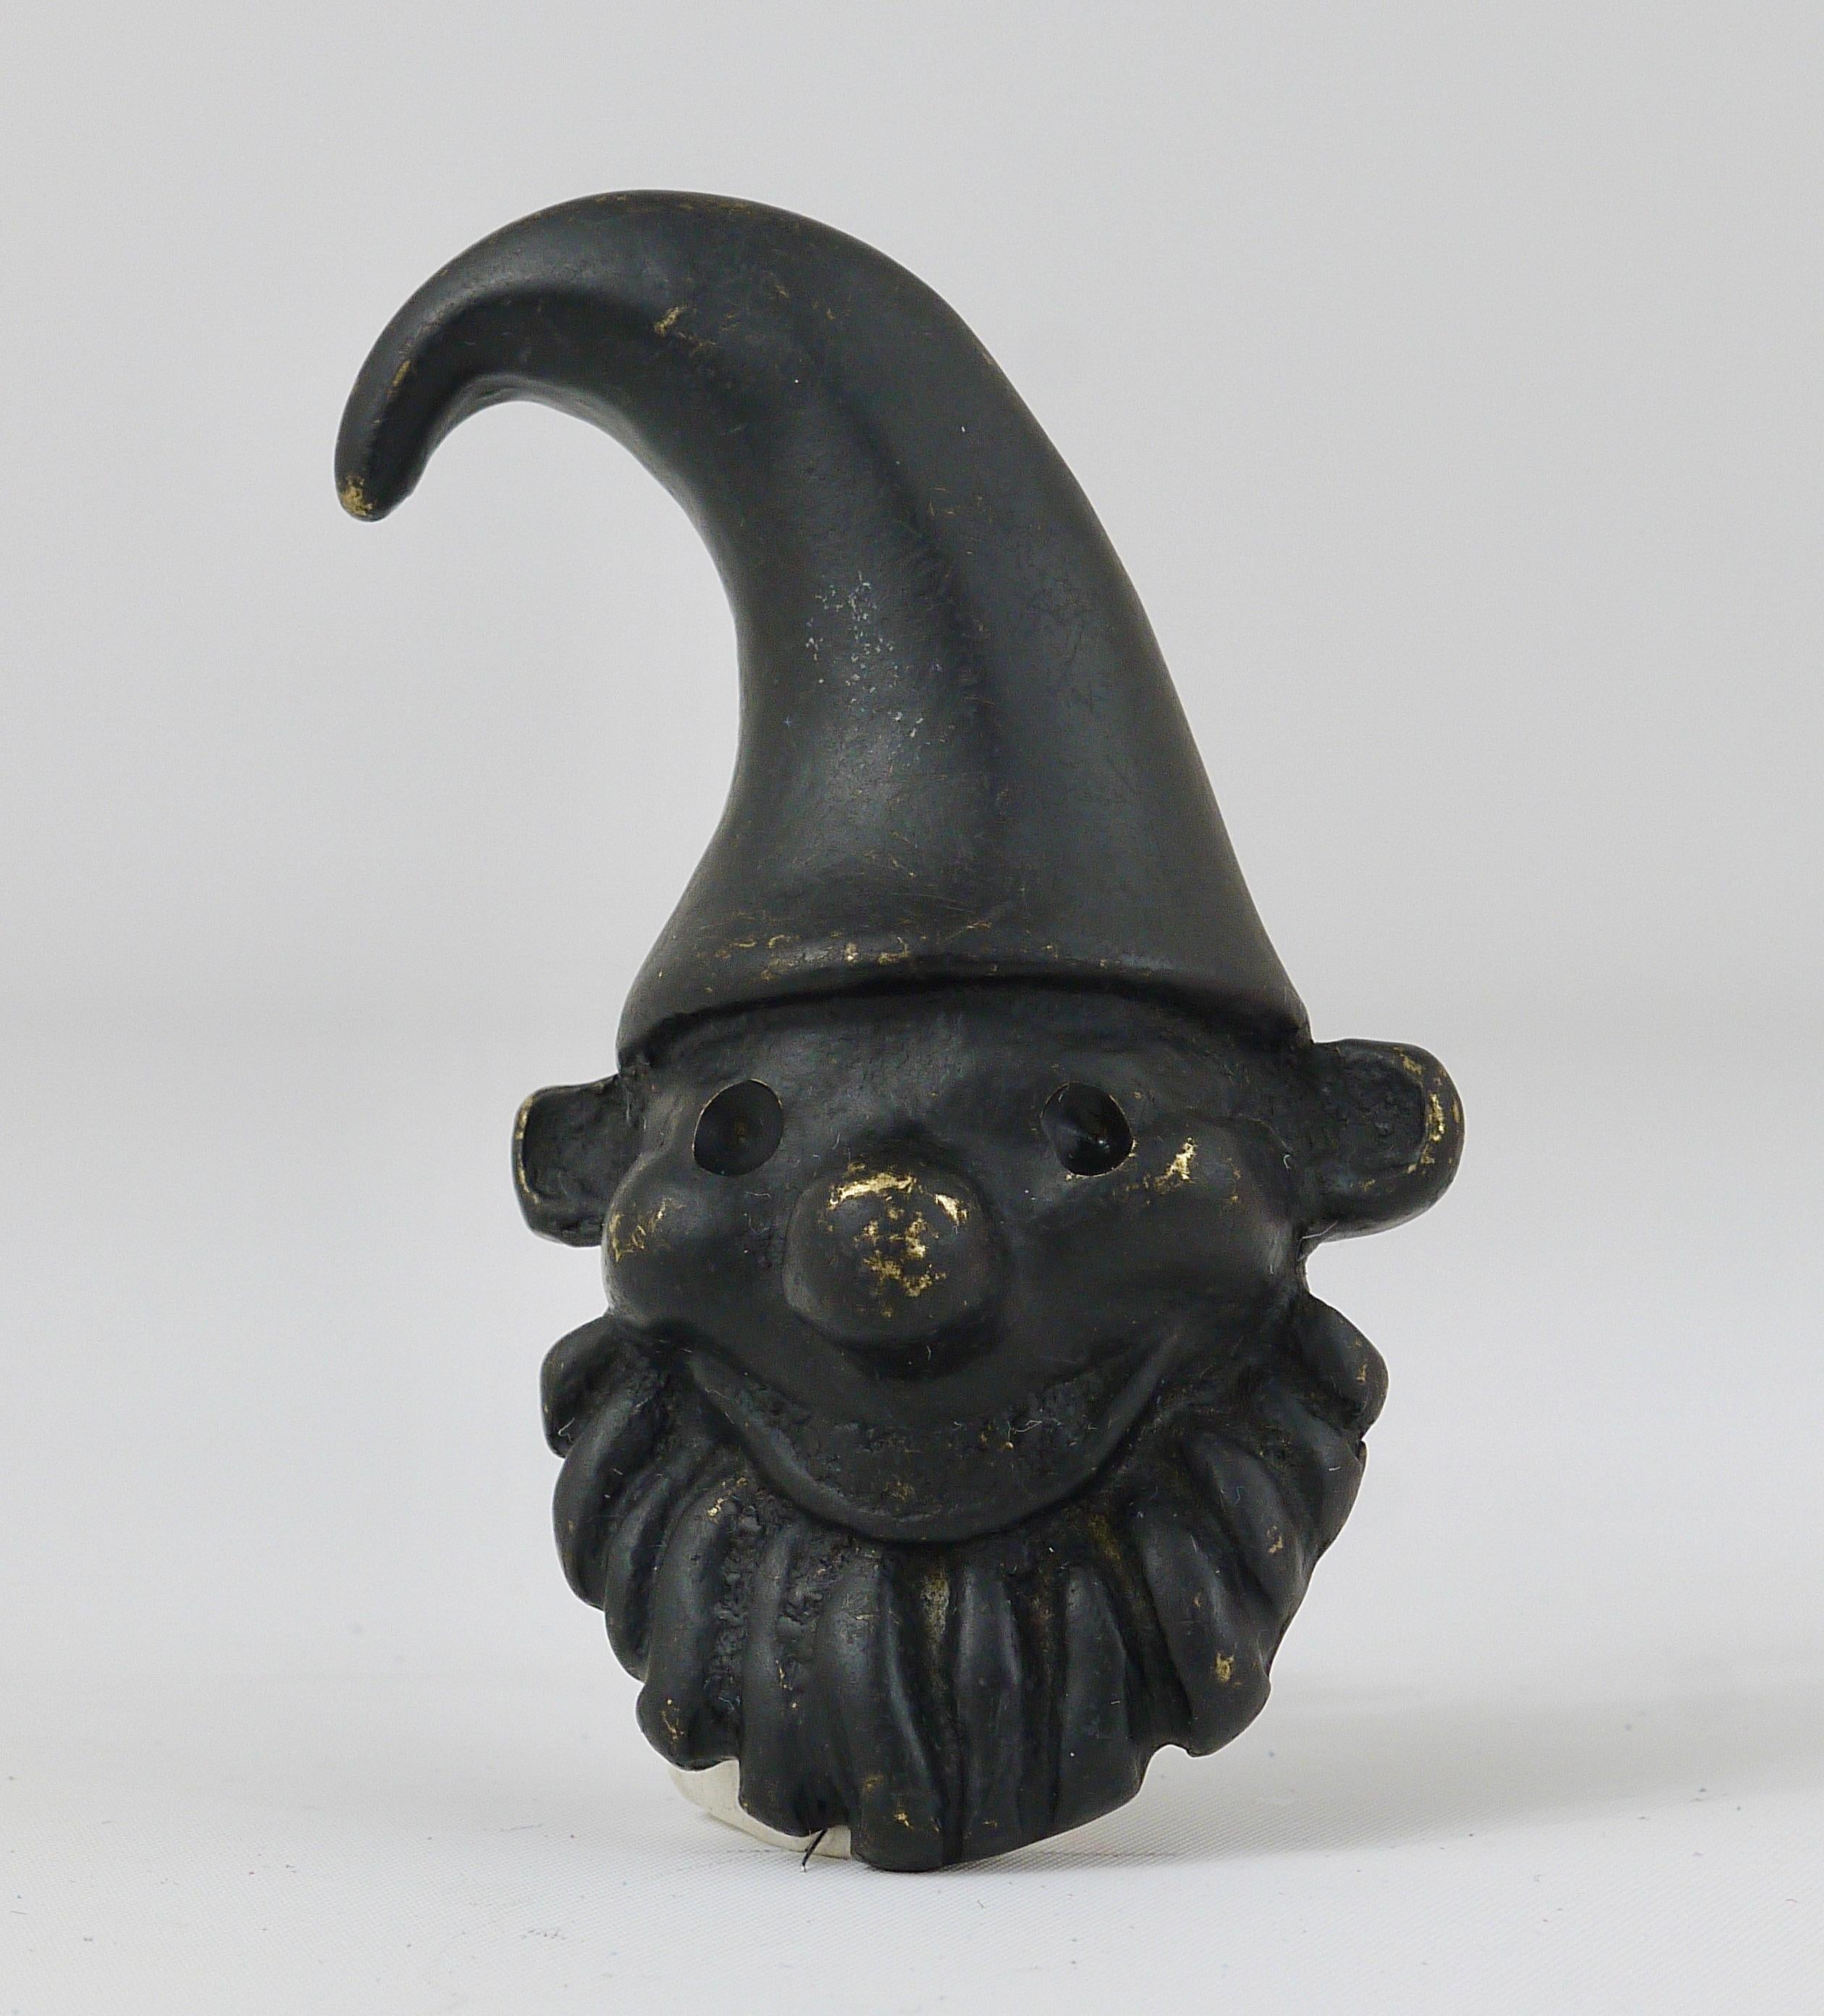 A charming midcentury bottle opener/cork screw, displaying a dwarf. A humorous design by Walter Bosse, executed by Hertha Baller Austria in the 1950s. Made of black-finished brass, in good condition.